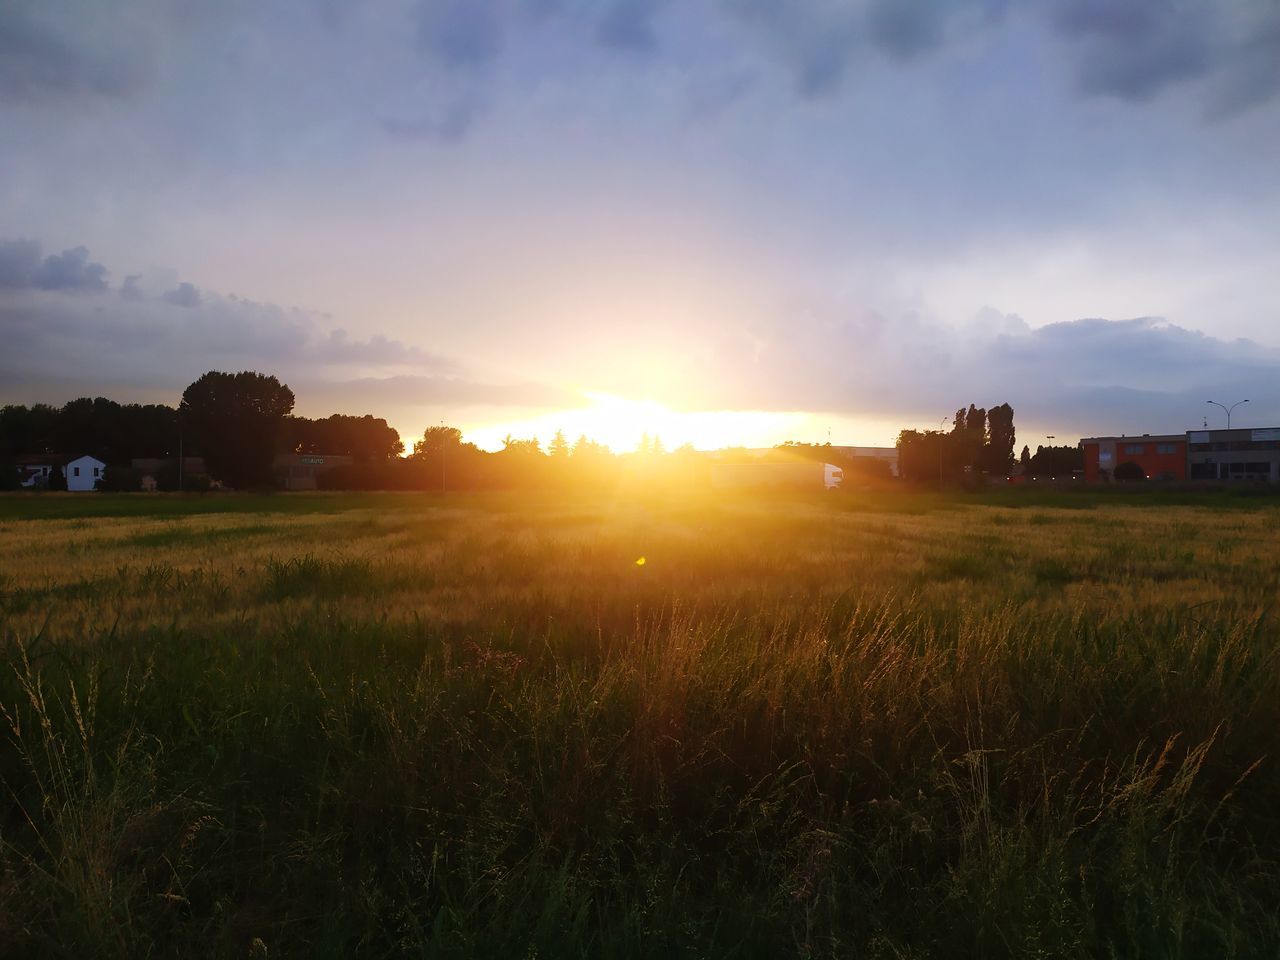 sky, horizon, landscape, morning, environment, nature, field, cloud, plant, land, dawn, sunrise, grass, sunlight, rural scene, sun, scenics - nature, beauty in nature, architecture, hill, plain, agriculture, tranquility, built structure, sunbeam, no people, prairie, tranquil scene, building, building exterior, lens flare, rural area, cereal plant, twilight, crop, outdoors, summer, farm, idyllic, tree, meadow, back lit, dramatic sky, grassland, non-urban scene, house, growth, horizon over land, travel, orange color, urban skyline, residential district, cloudscape, travel destinations, blue, natural environment